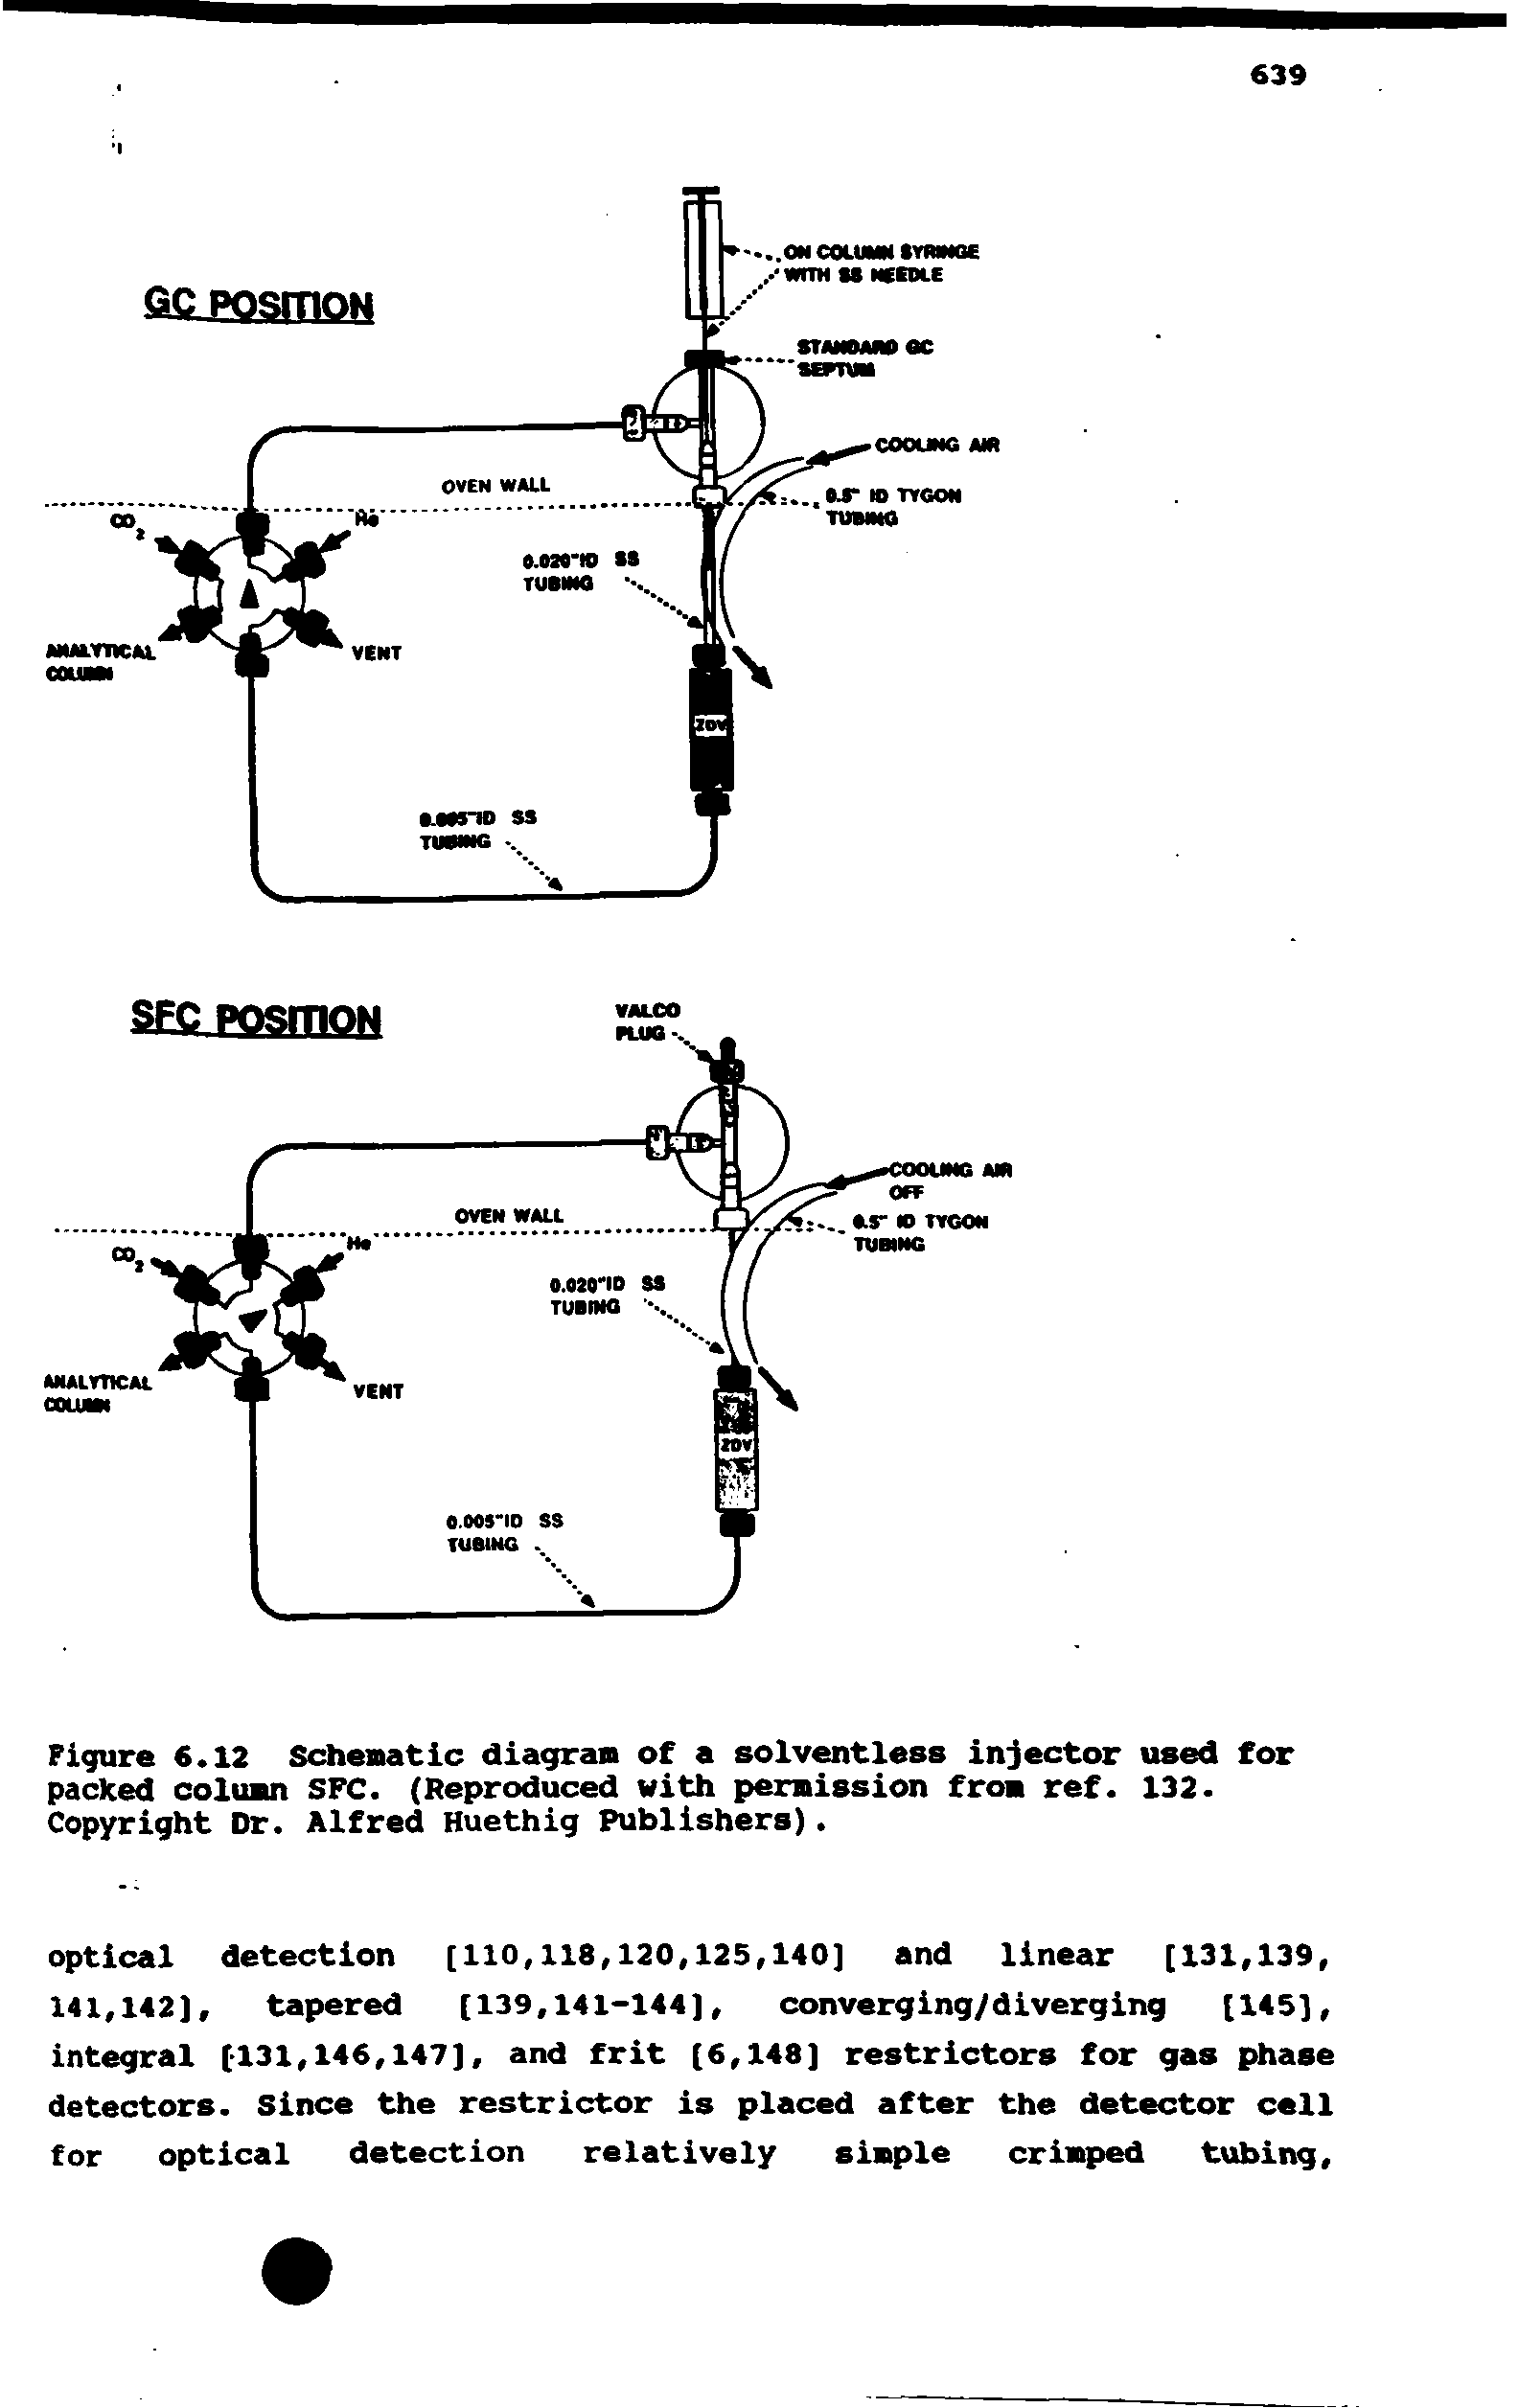 Figure 6.12 Schematic diagram of a solventless injector used for packed column SFC. (Reproduced with permission from ref. 132. Copyright Dr. Alfred Huethig Publishers).